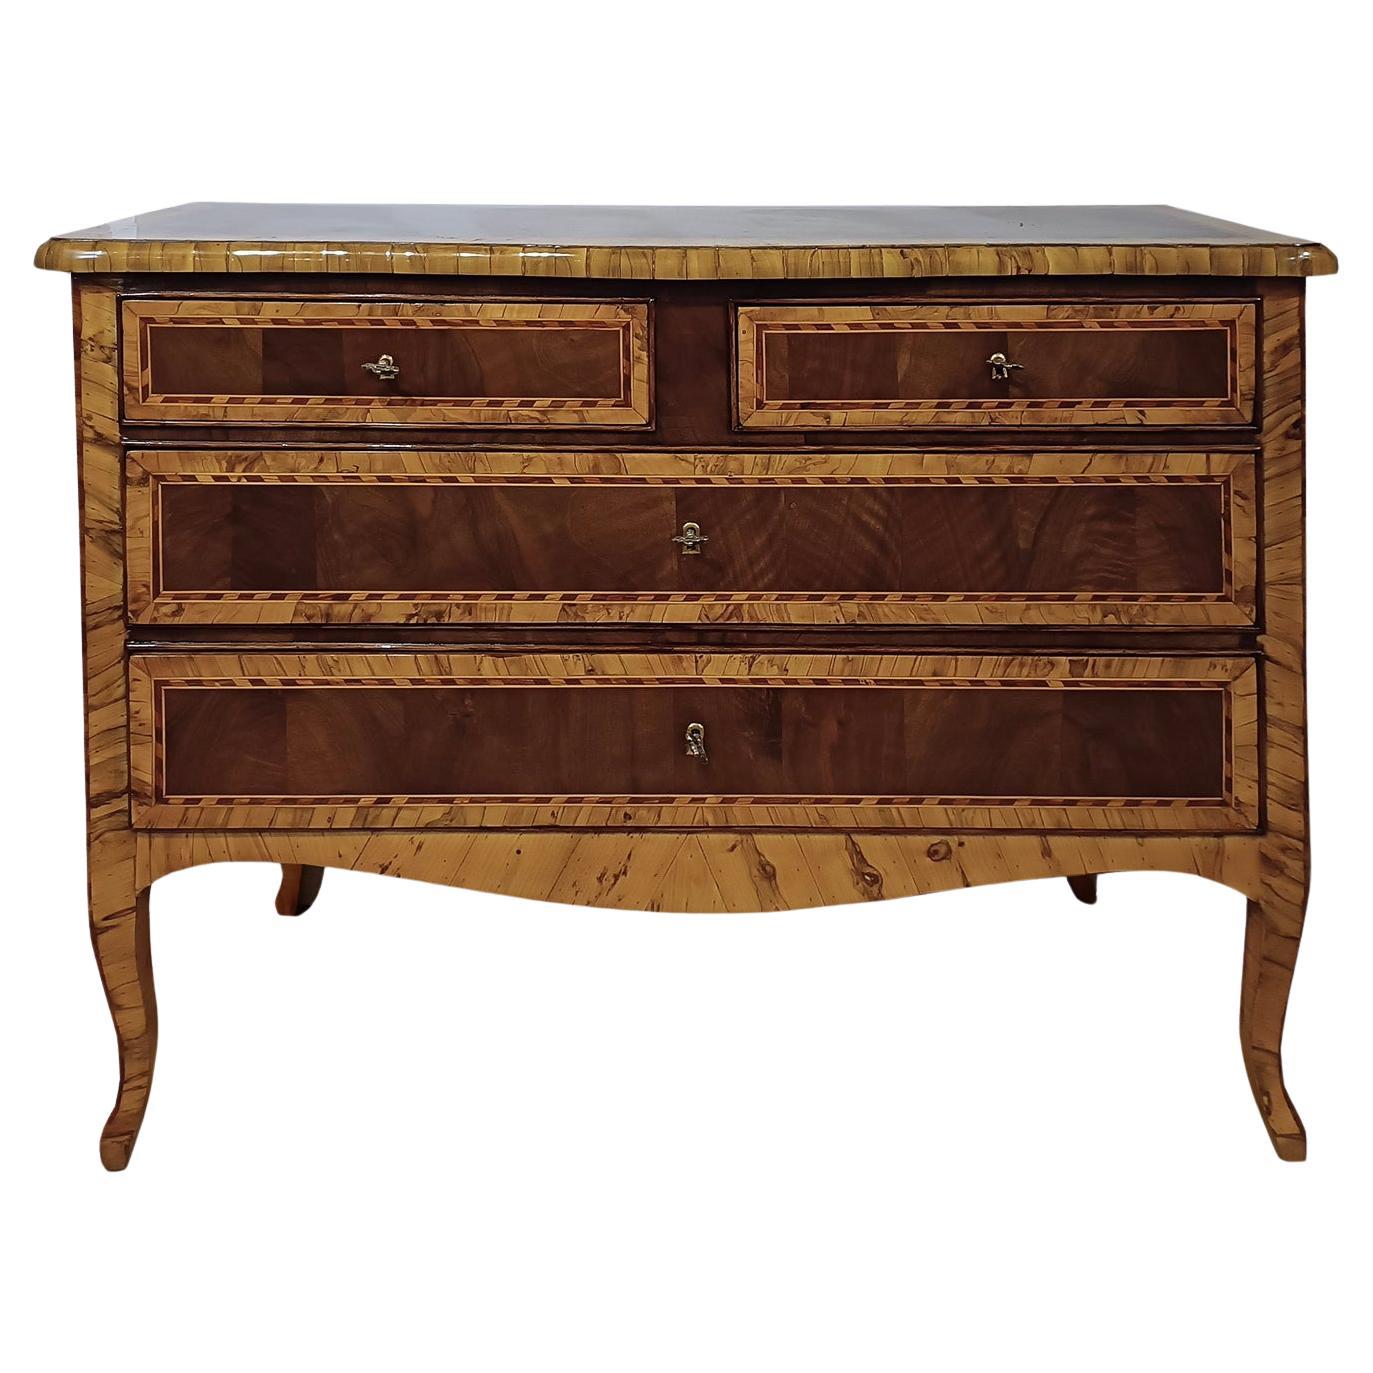 MID 18th CENTURY LOUIS XV CHEST OF DRAWERS 